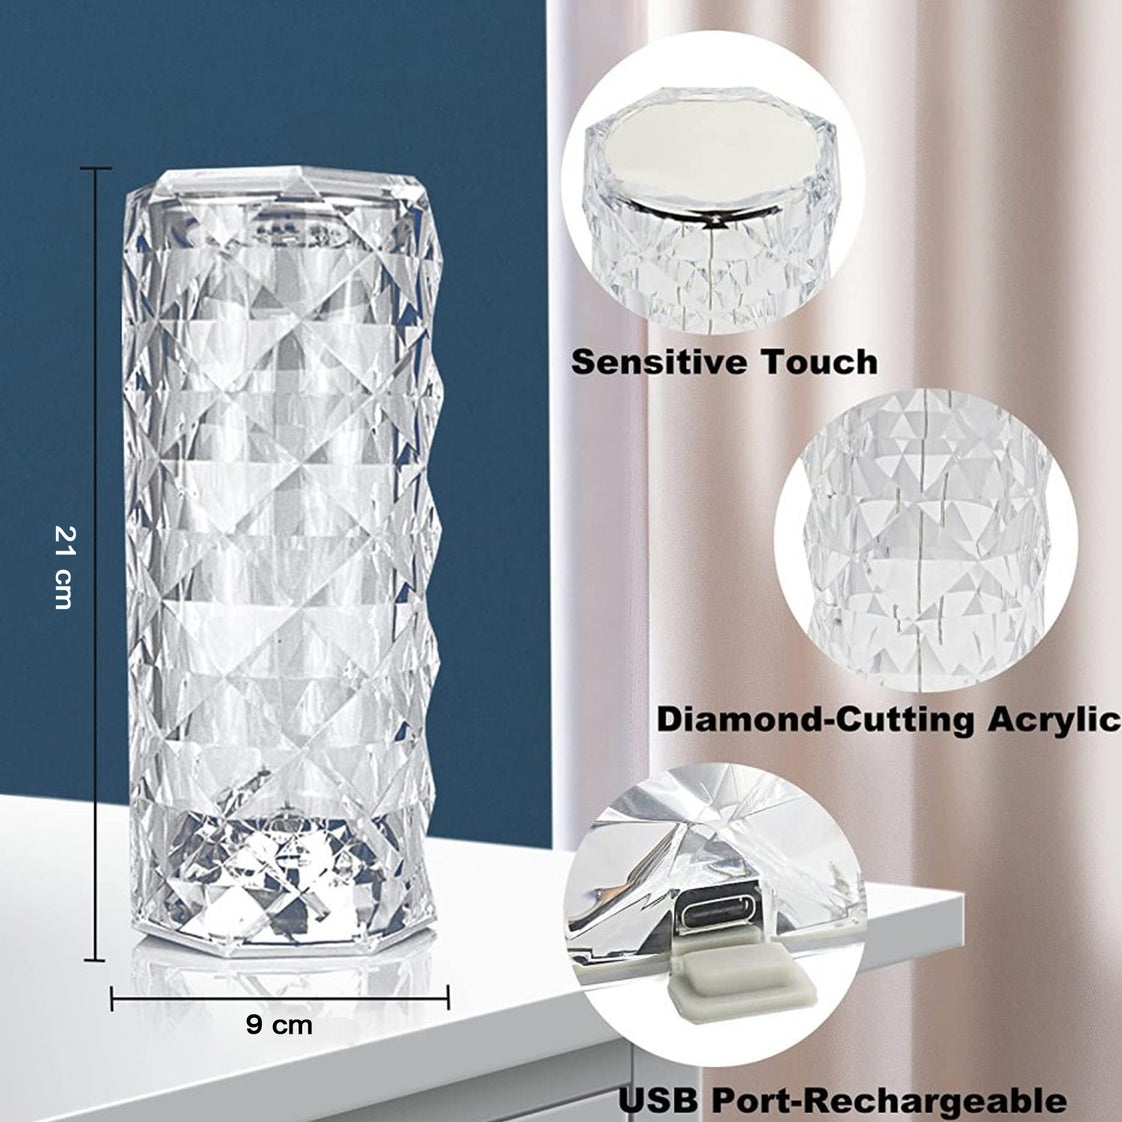 CRYSTAL TOUCH NIGHT LIGHT (16 COLORS) - ROSE DIAMOND TABLE LAMP